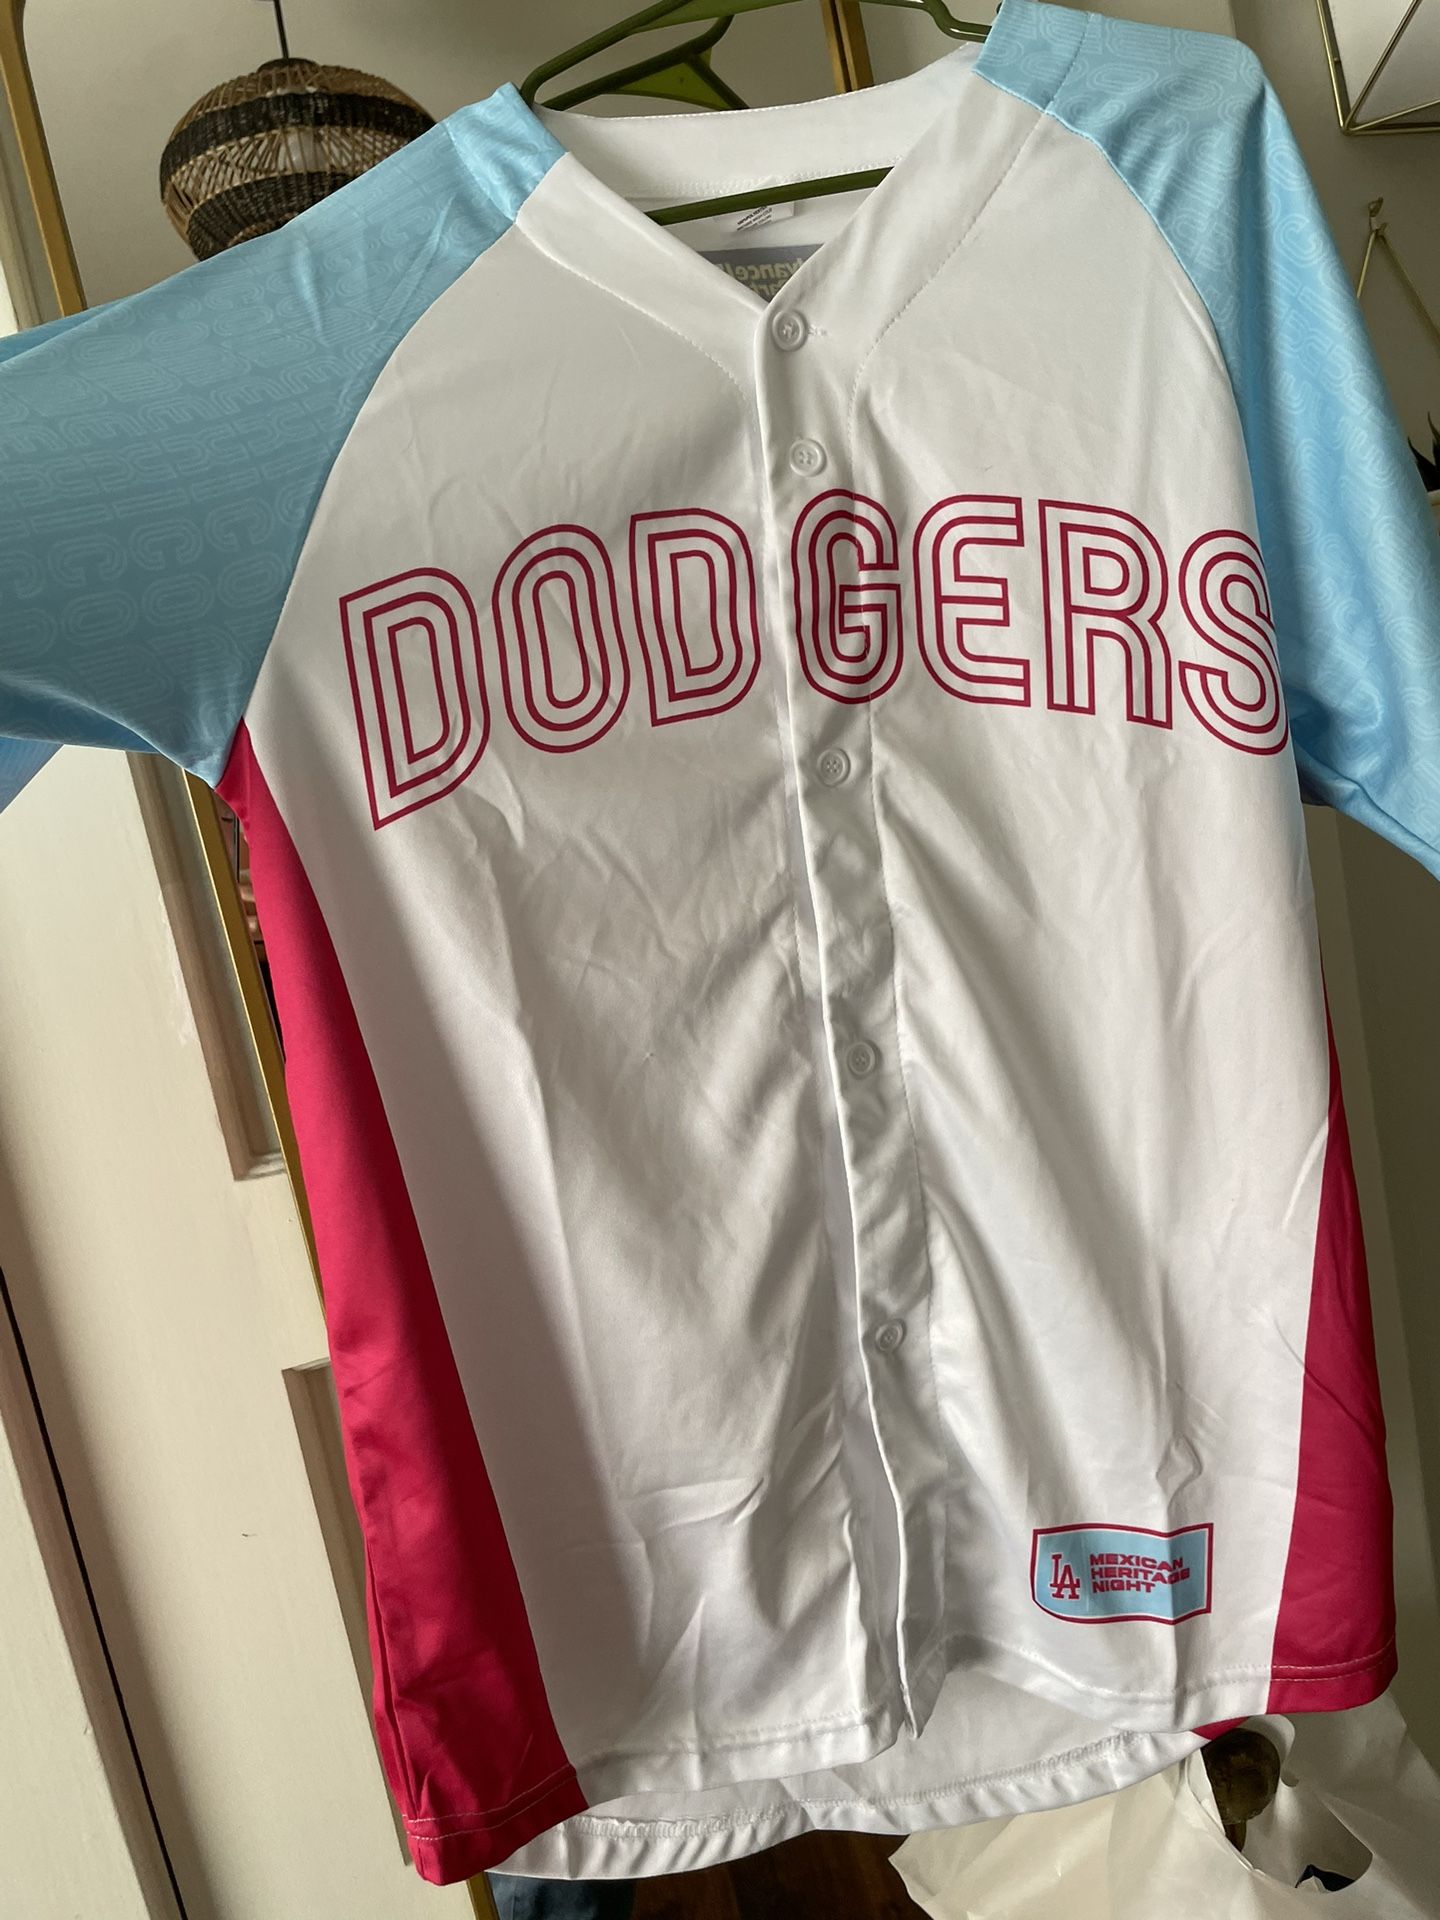 Dodgers Jersey (Mexican Heritage Night) for Sale in Claremont, CA